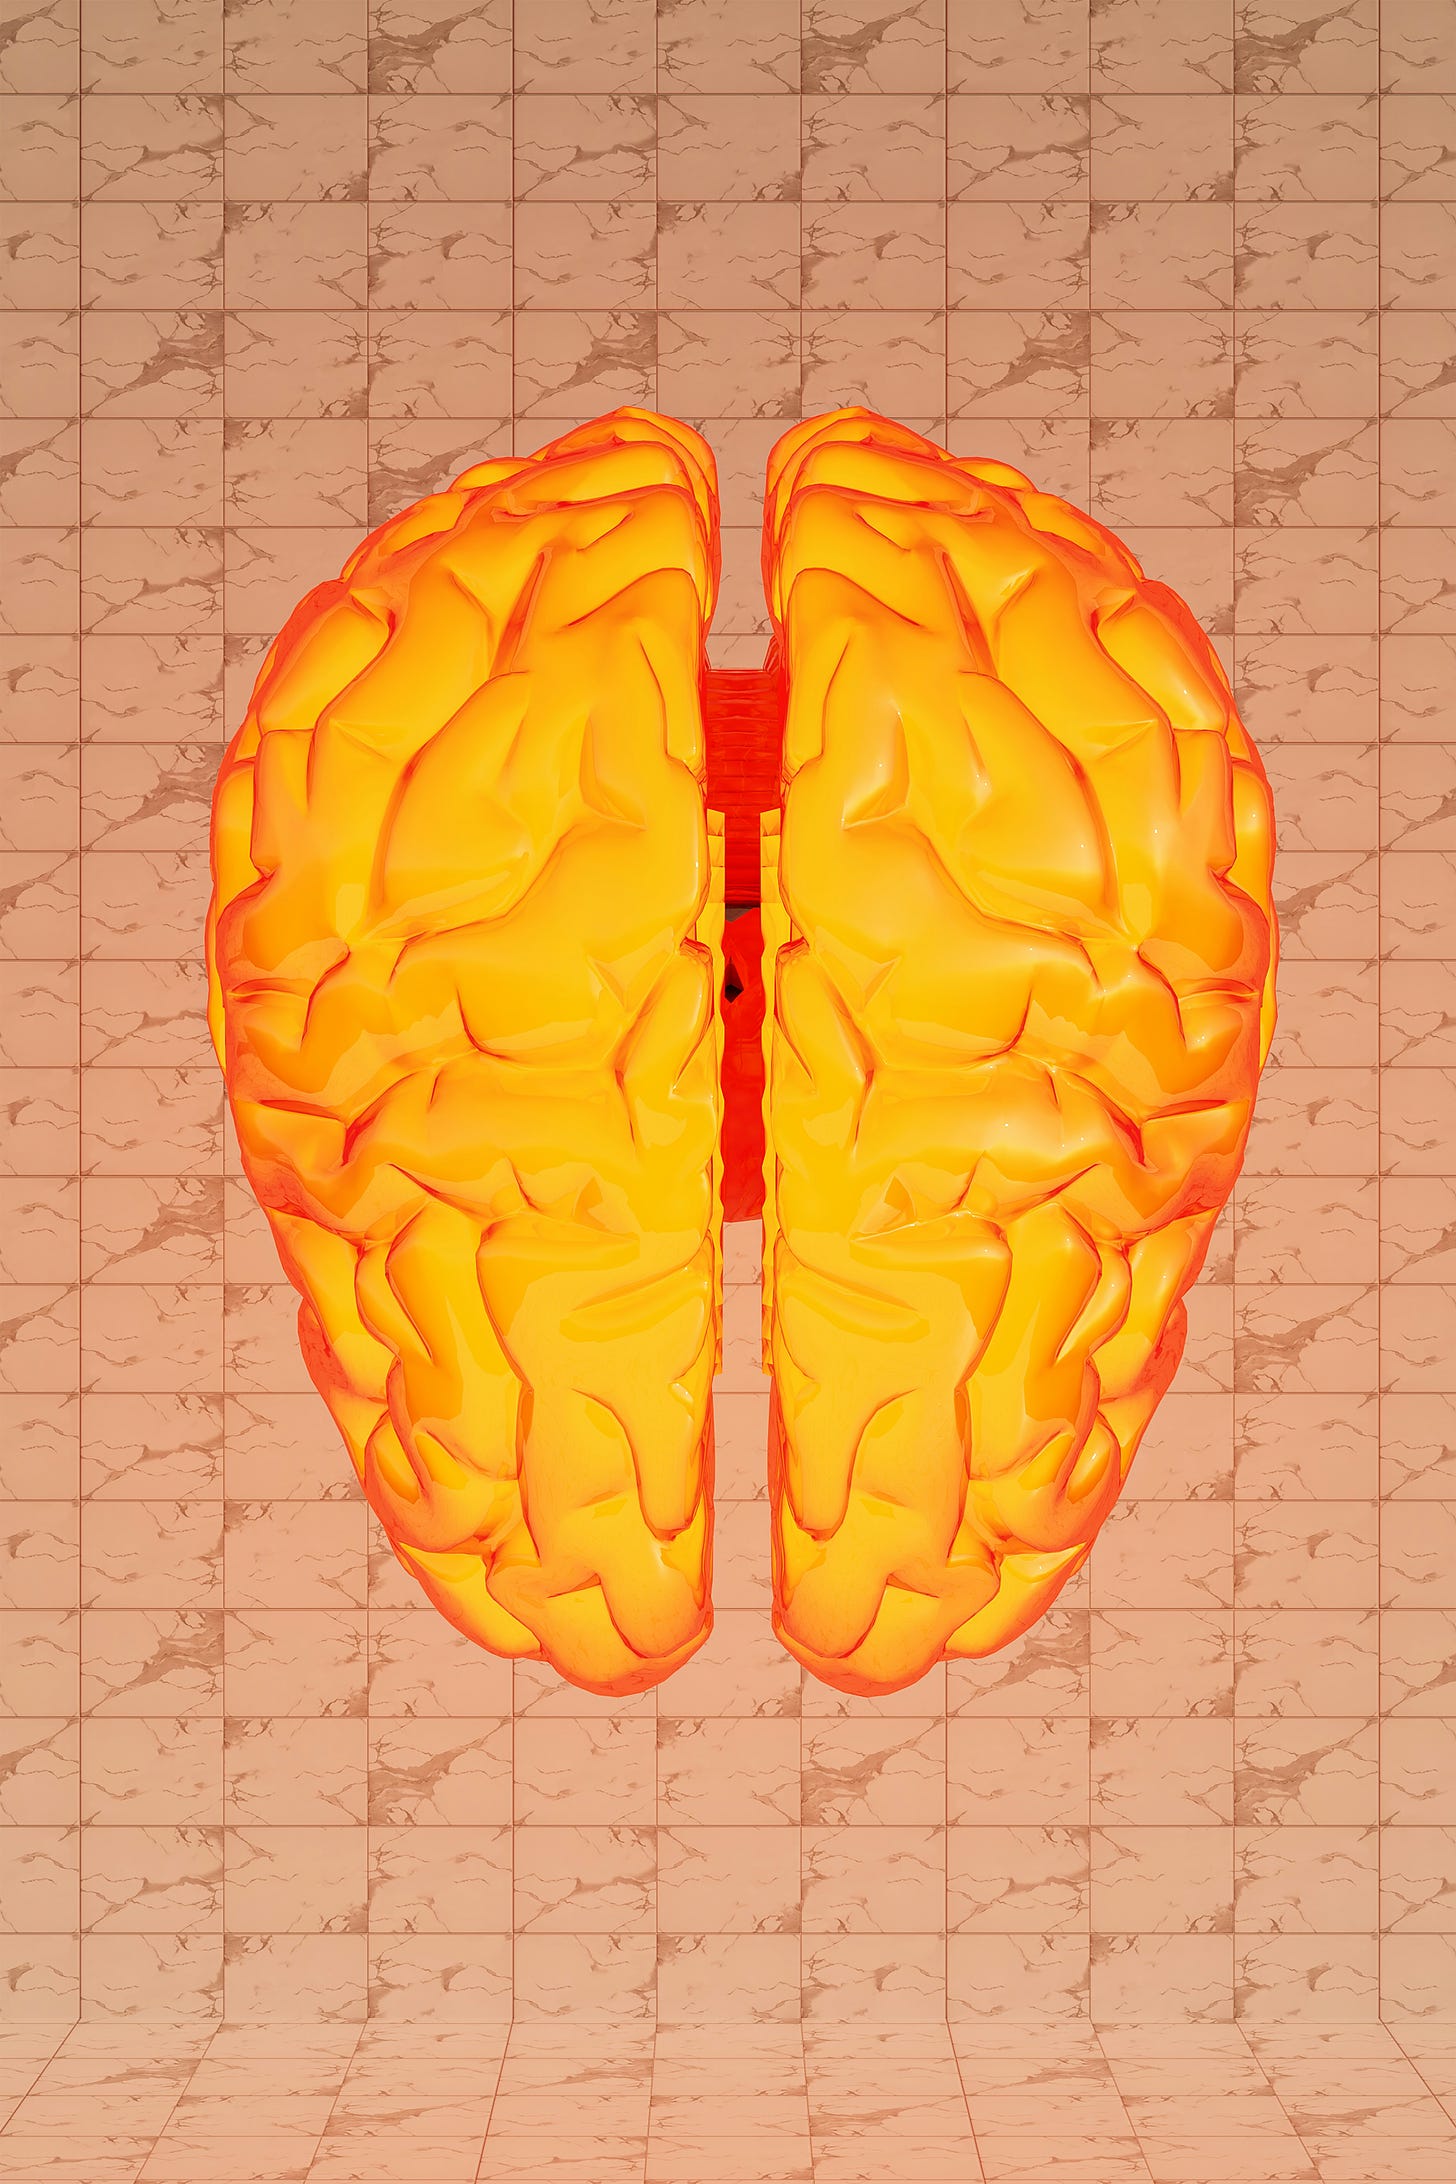 Graphic of a brain in yellow and orange 